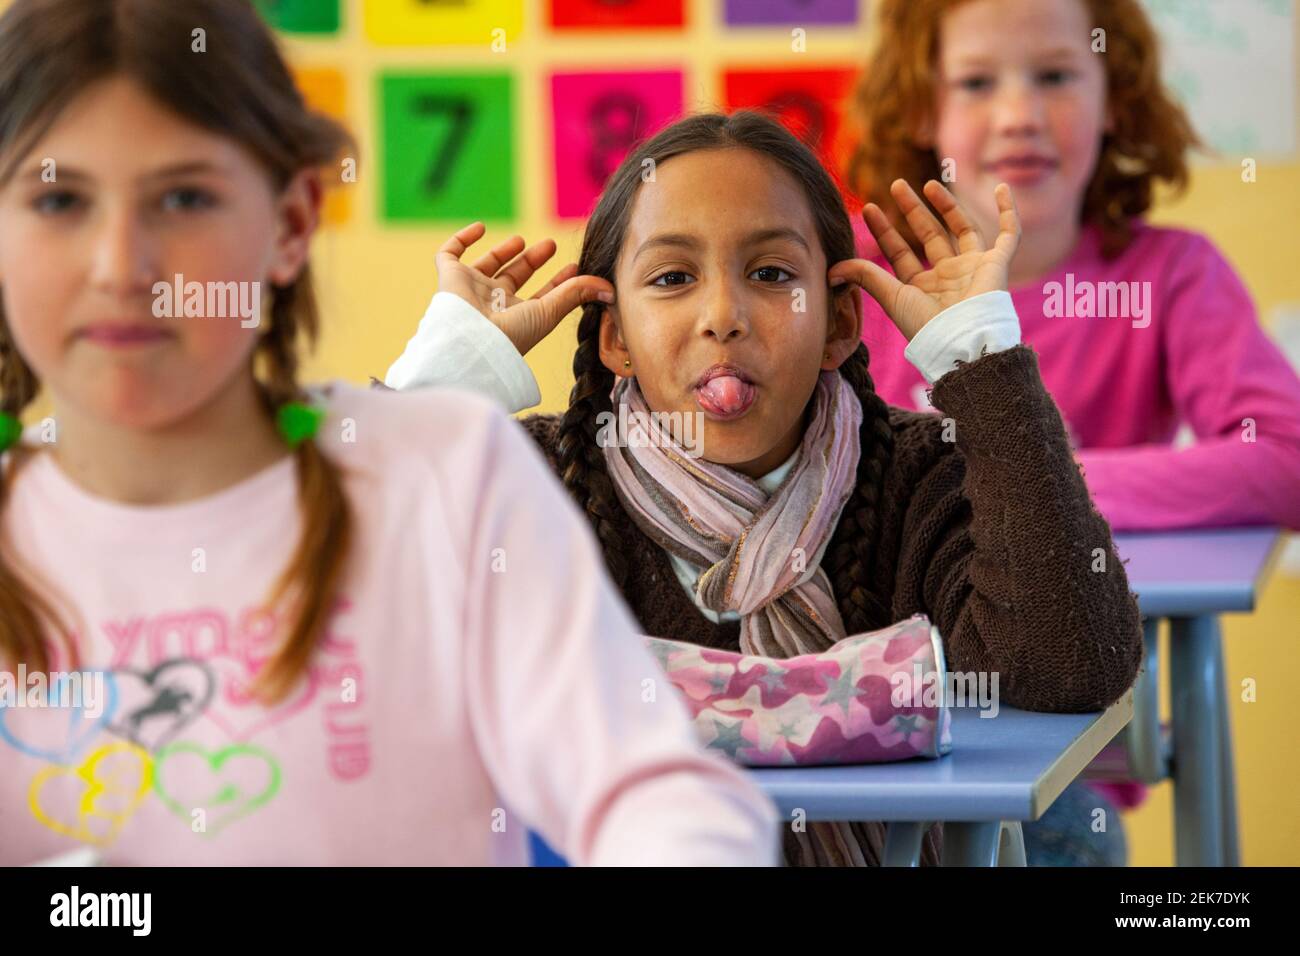 Young girl sticking her tongue out in a school classroom Stock Photo